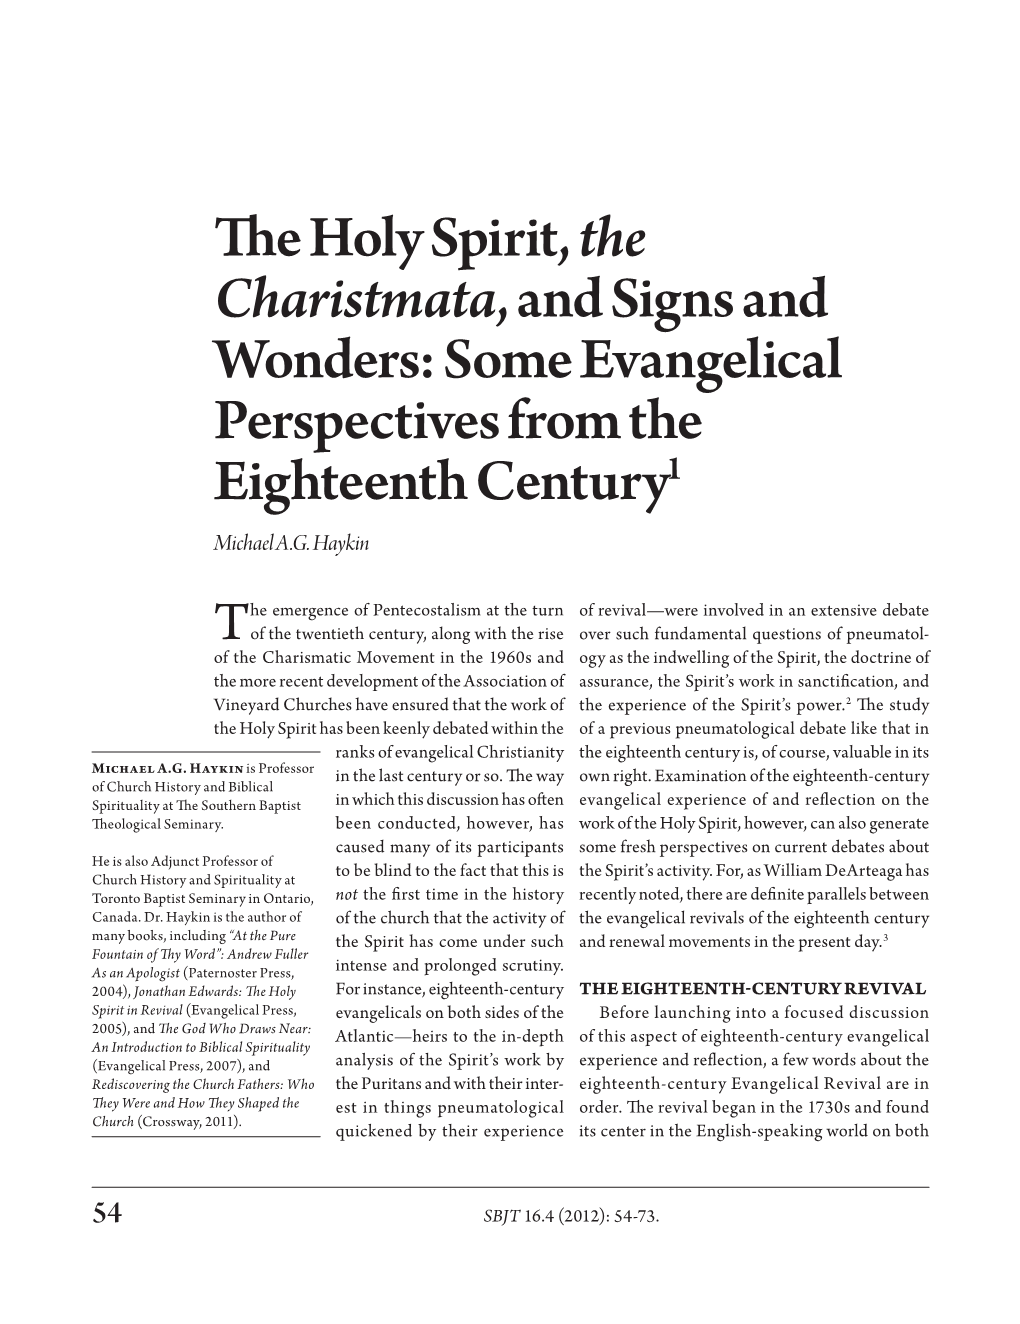 The Holy Spirit, the Charistmata, and Signs and Wonders: Some Evangelical Perspectives from the Eighteenth Century1 Michael A.G